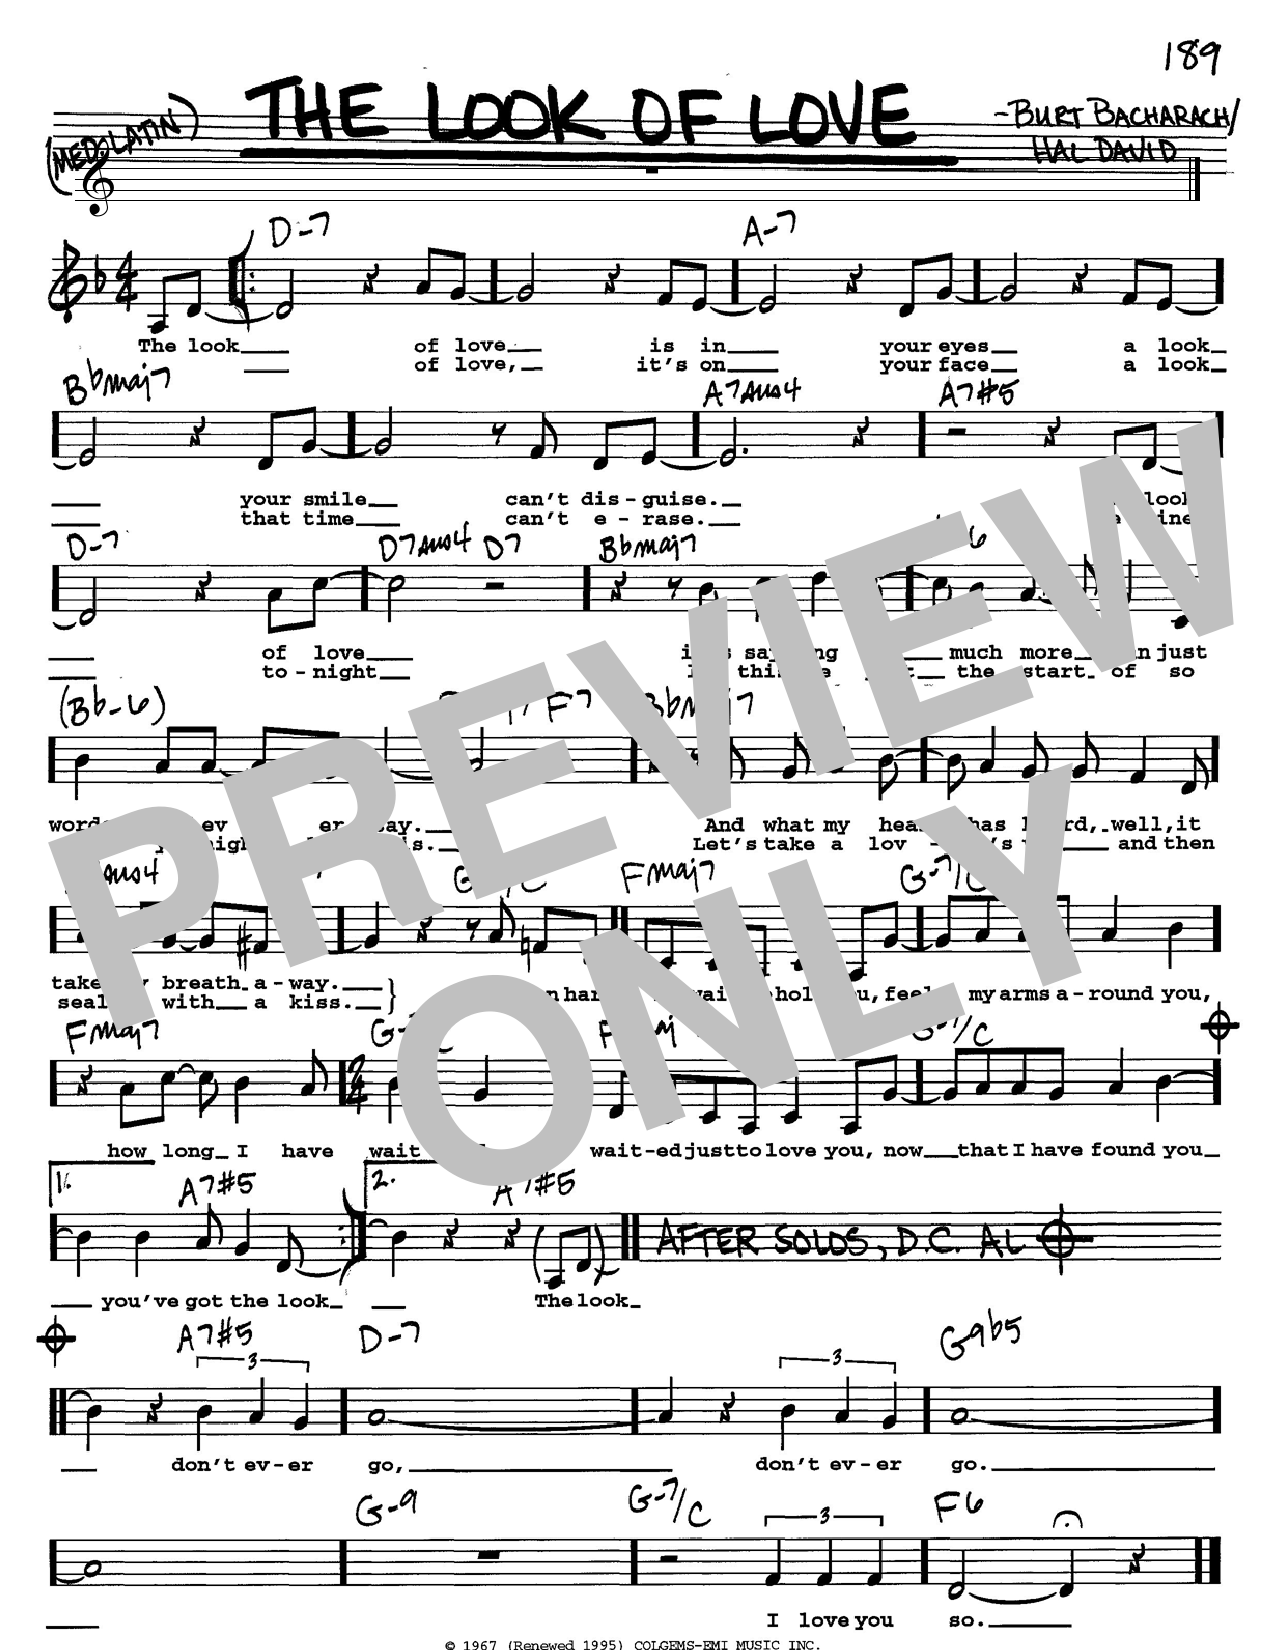 Bacharach & David The Look Of Love sheet music notes and chords. Download Printable PDF.